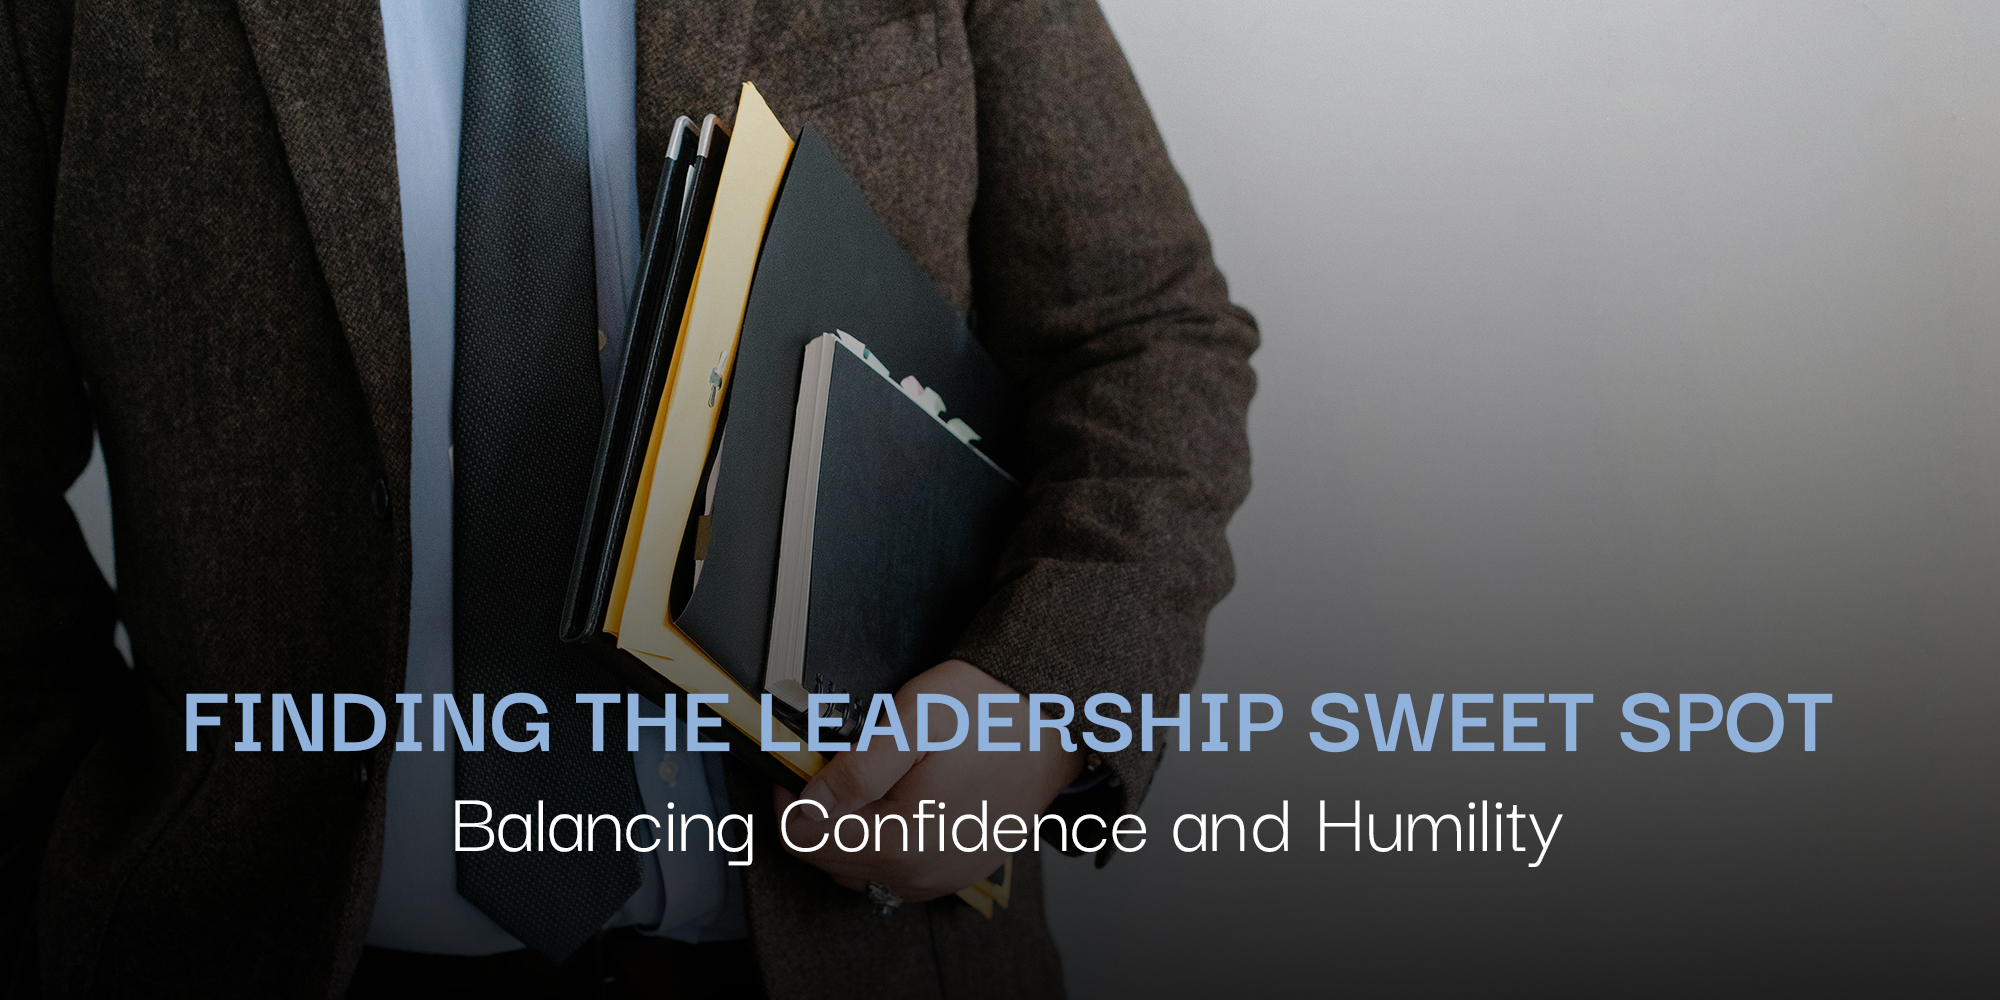 Finding the Leadership Sweet Spot: Balancing Confidence and Humility